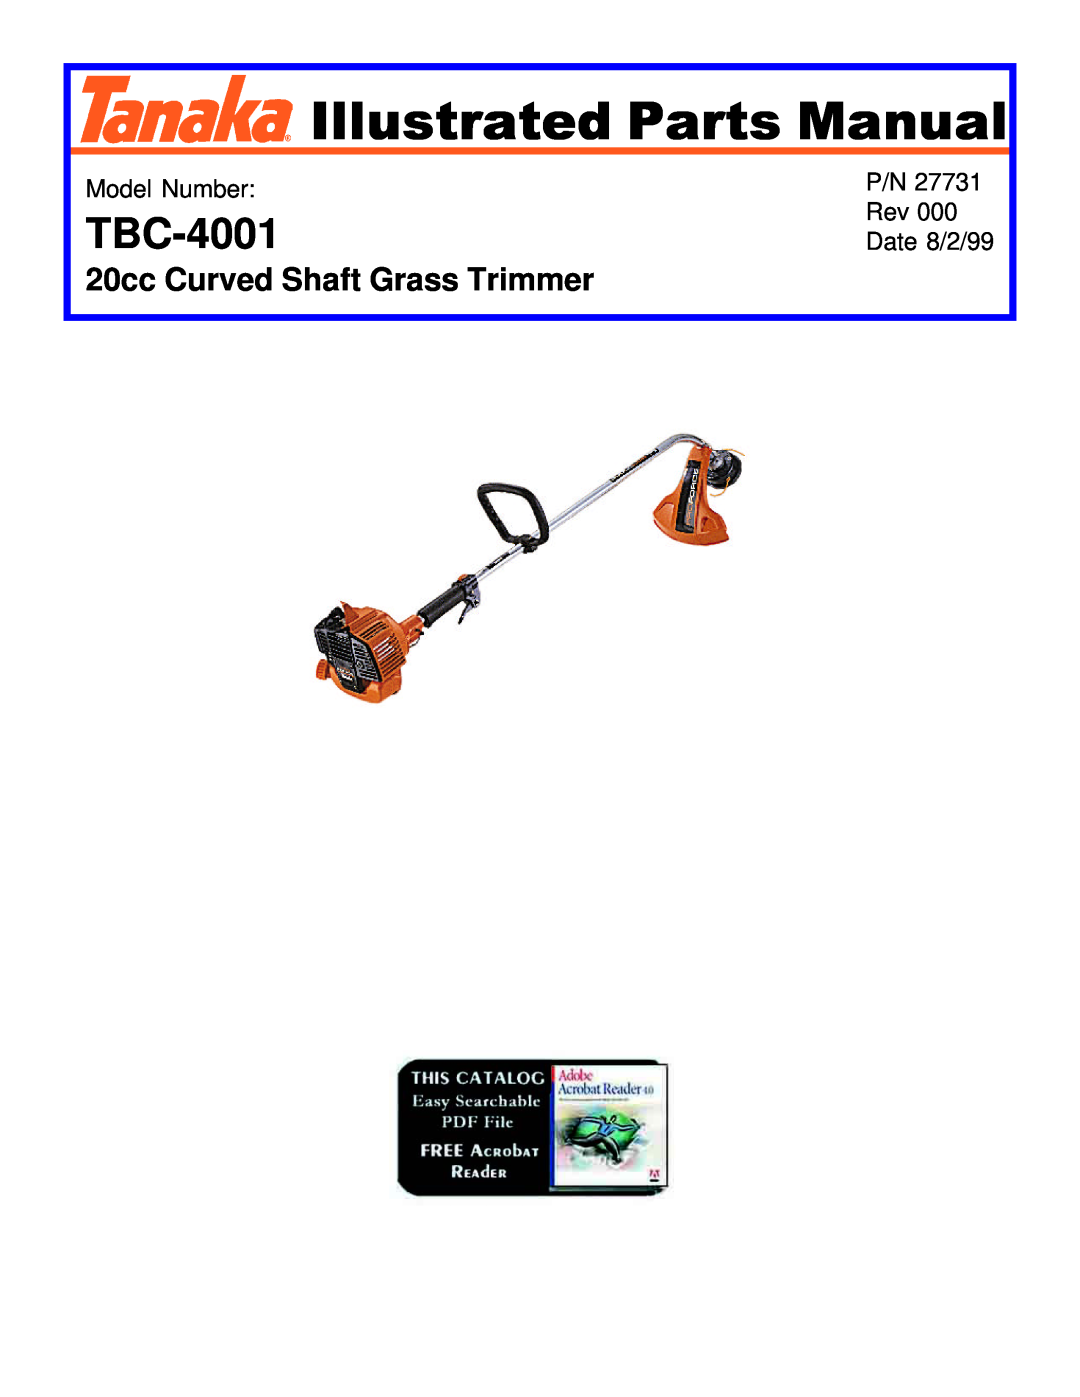 Tanaka TBC-4001 manual 20cc Curved Shaft Grass Trimmer, Illustrated Parts Manual, Model Number, Date 8/2/99 